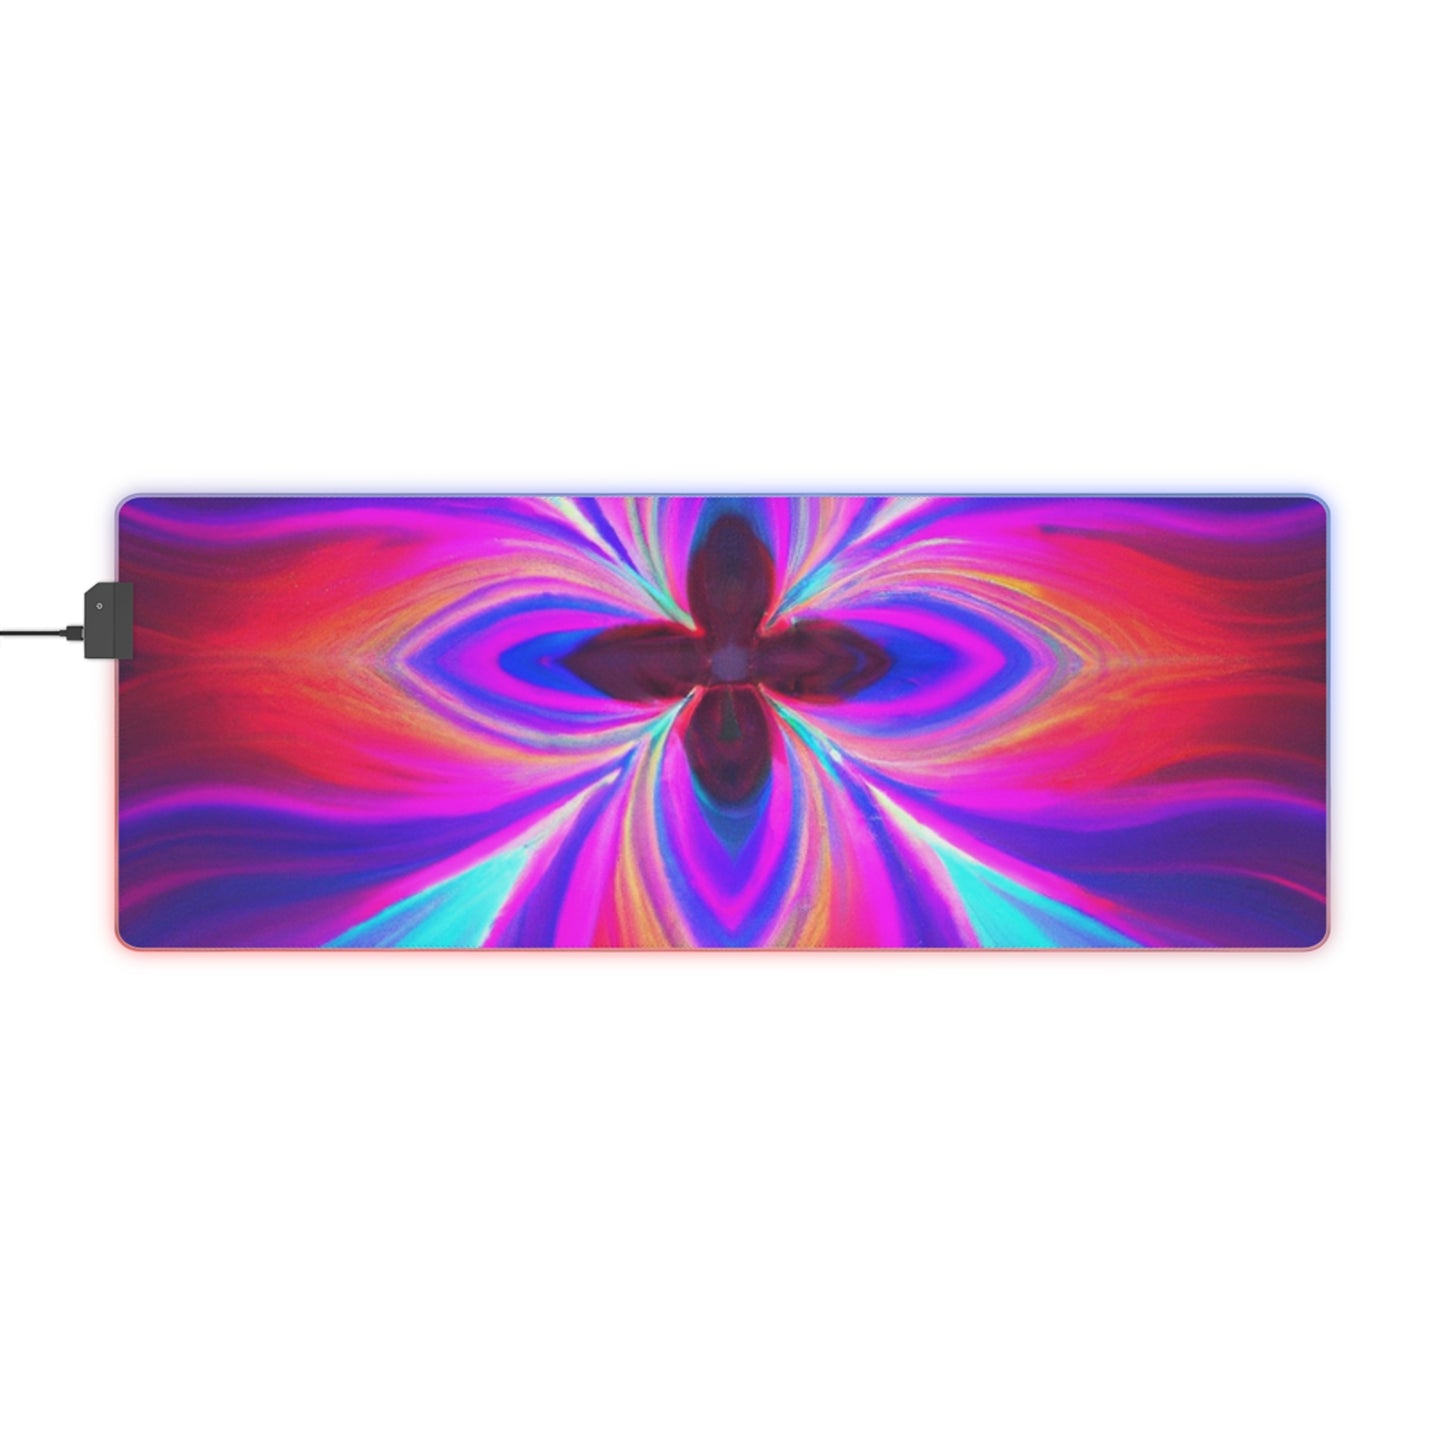 Rex Radburn - Psychedelic Trippy LED Light Up Gaming Mouse Pad